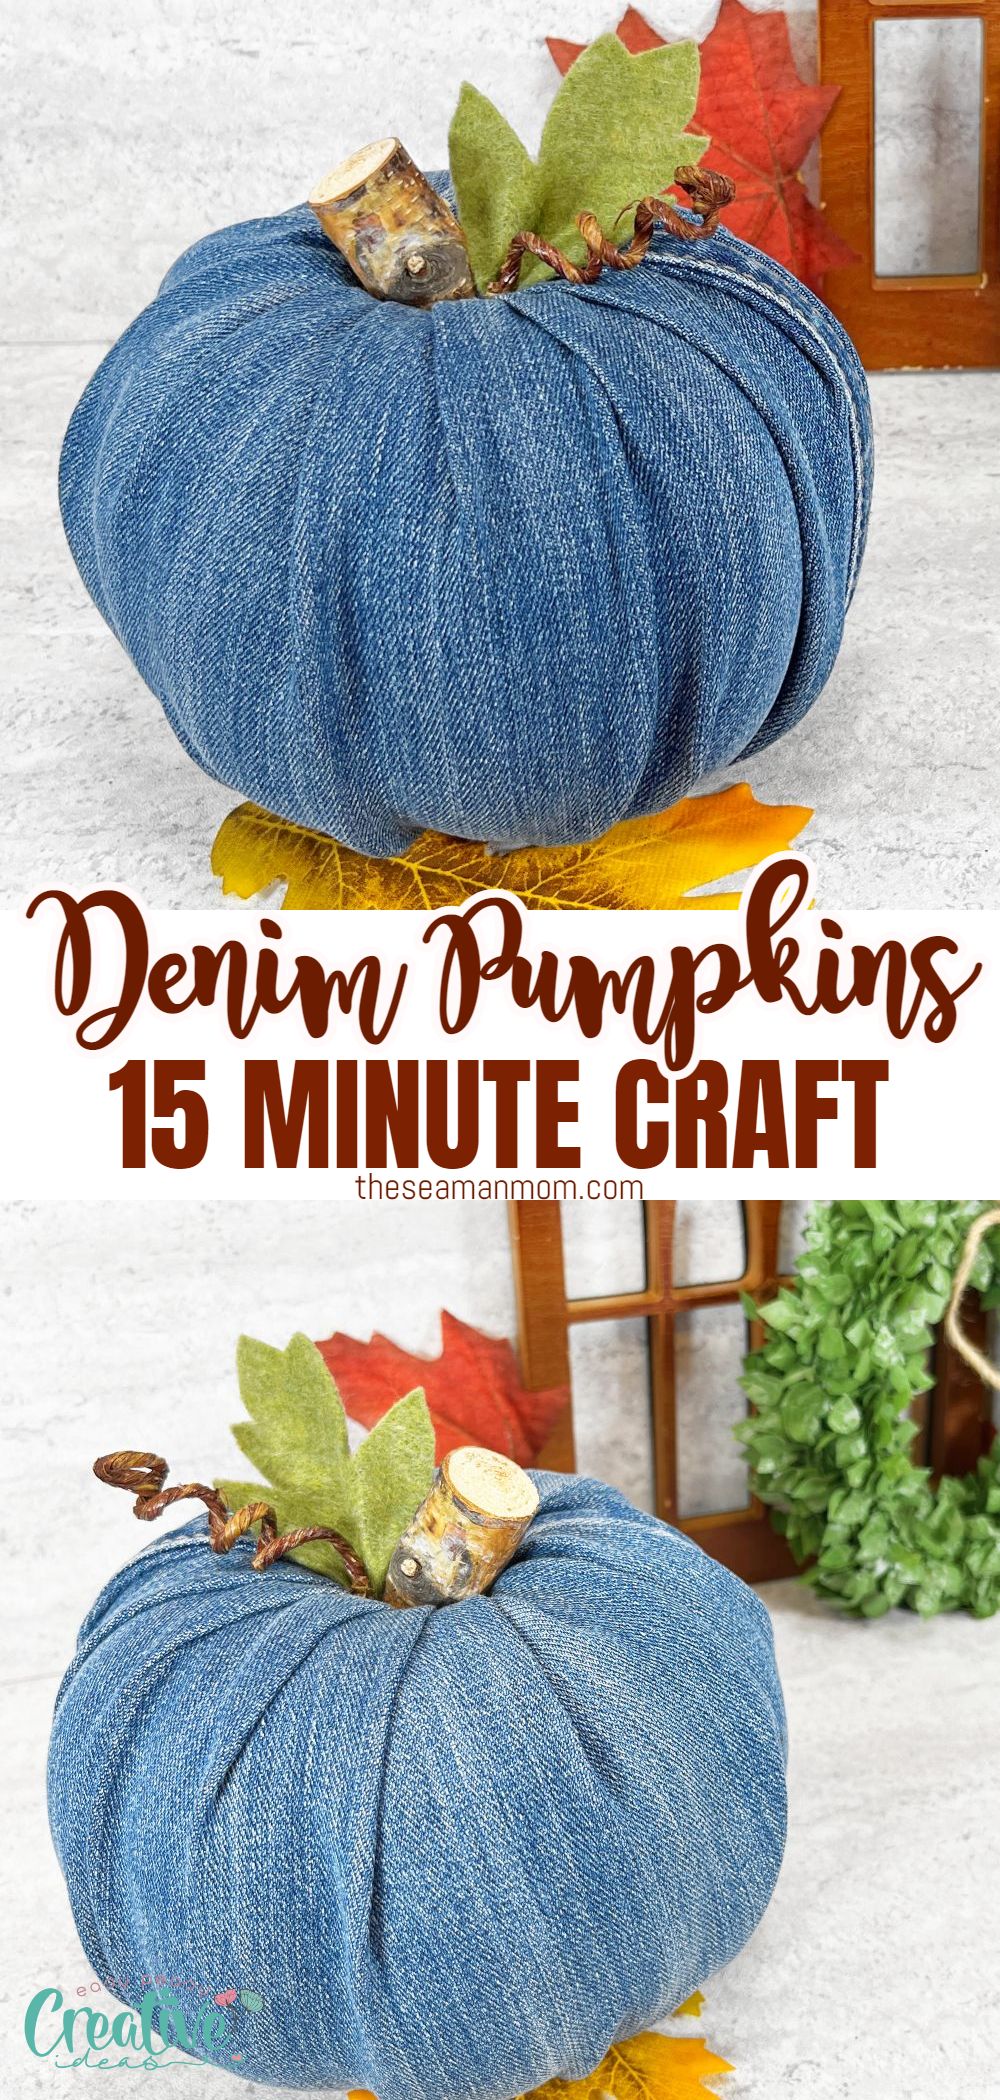 Looking for a fun and easy way to decorate your home this fall? Try making some DIY denim pumpkins using old jeans that you no longer need. So get creative and start crafting today! via @petroneagu